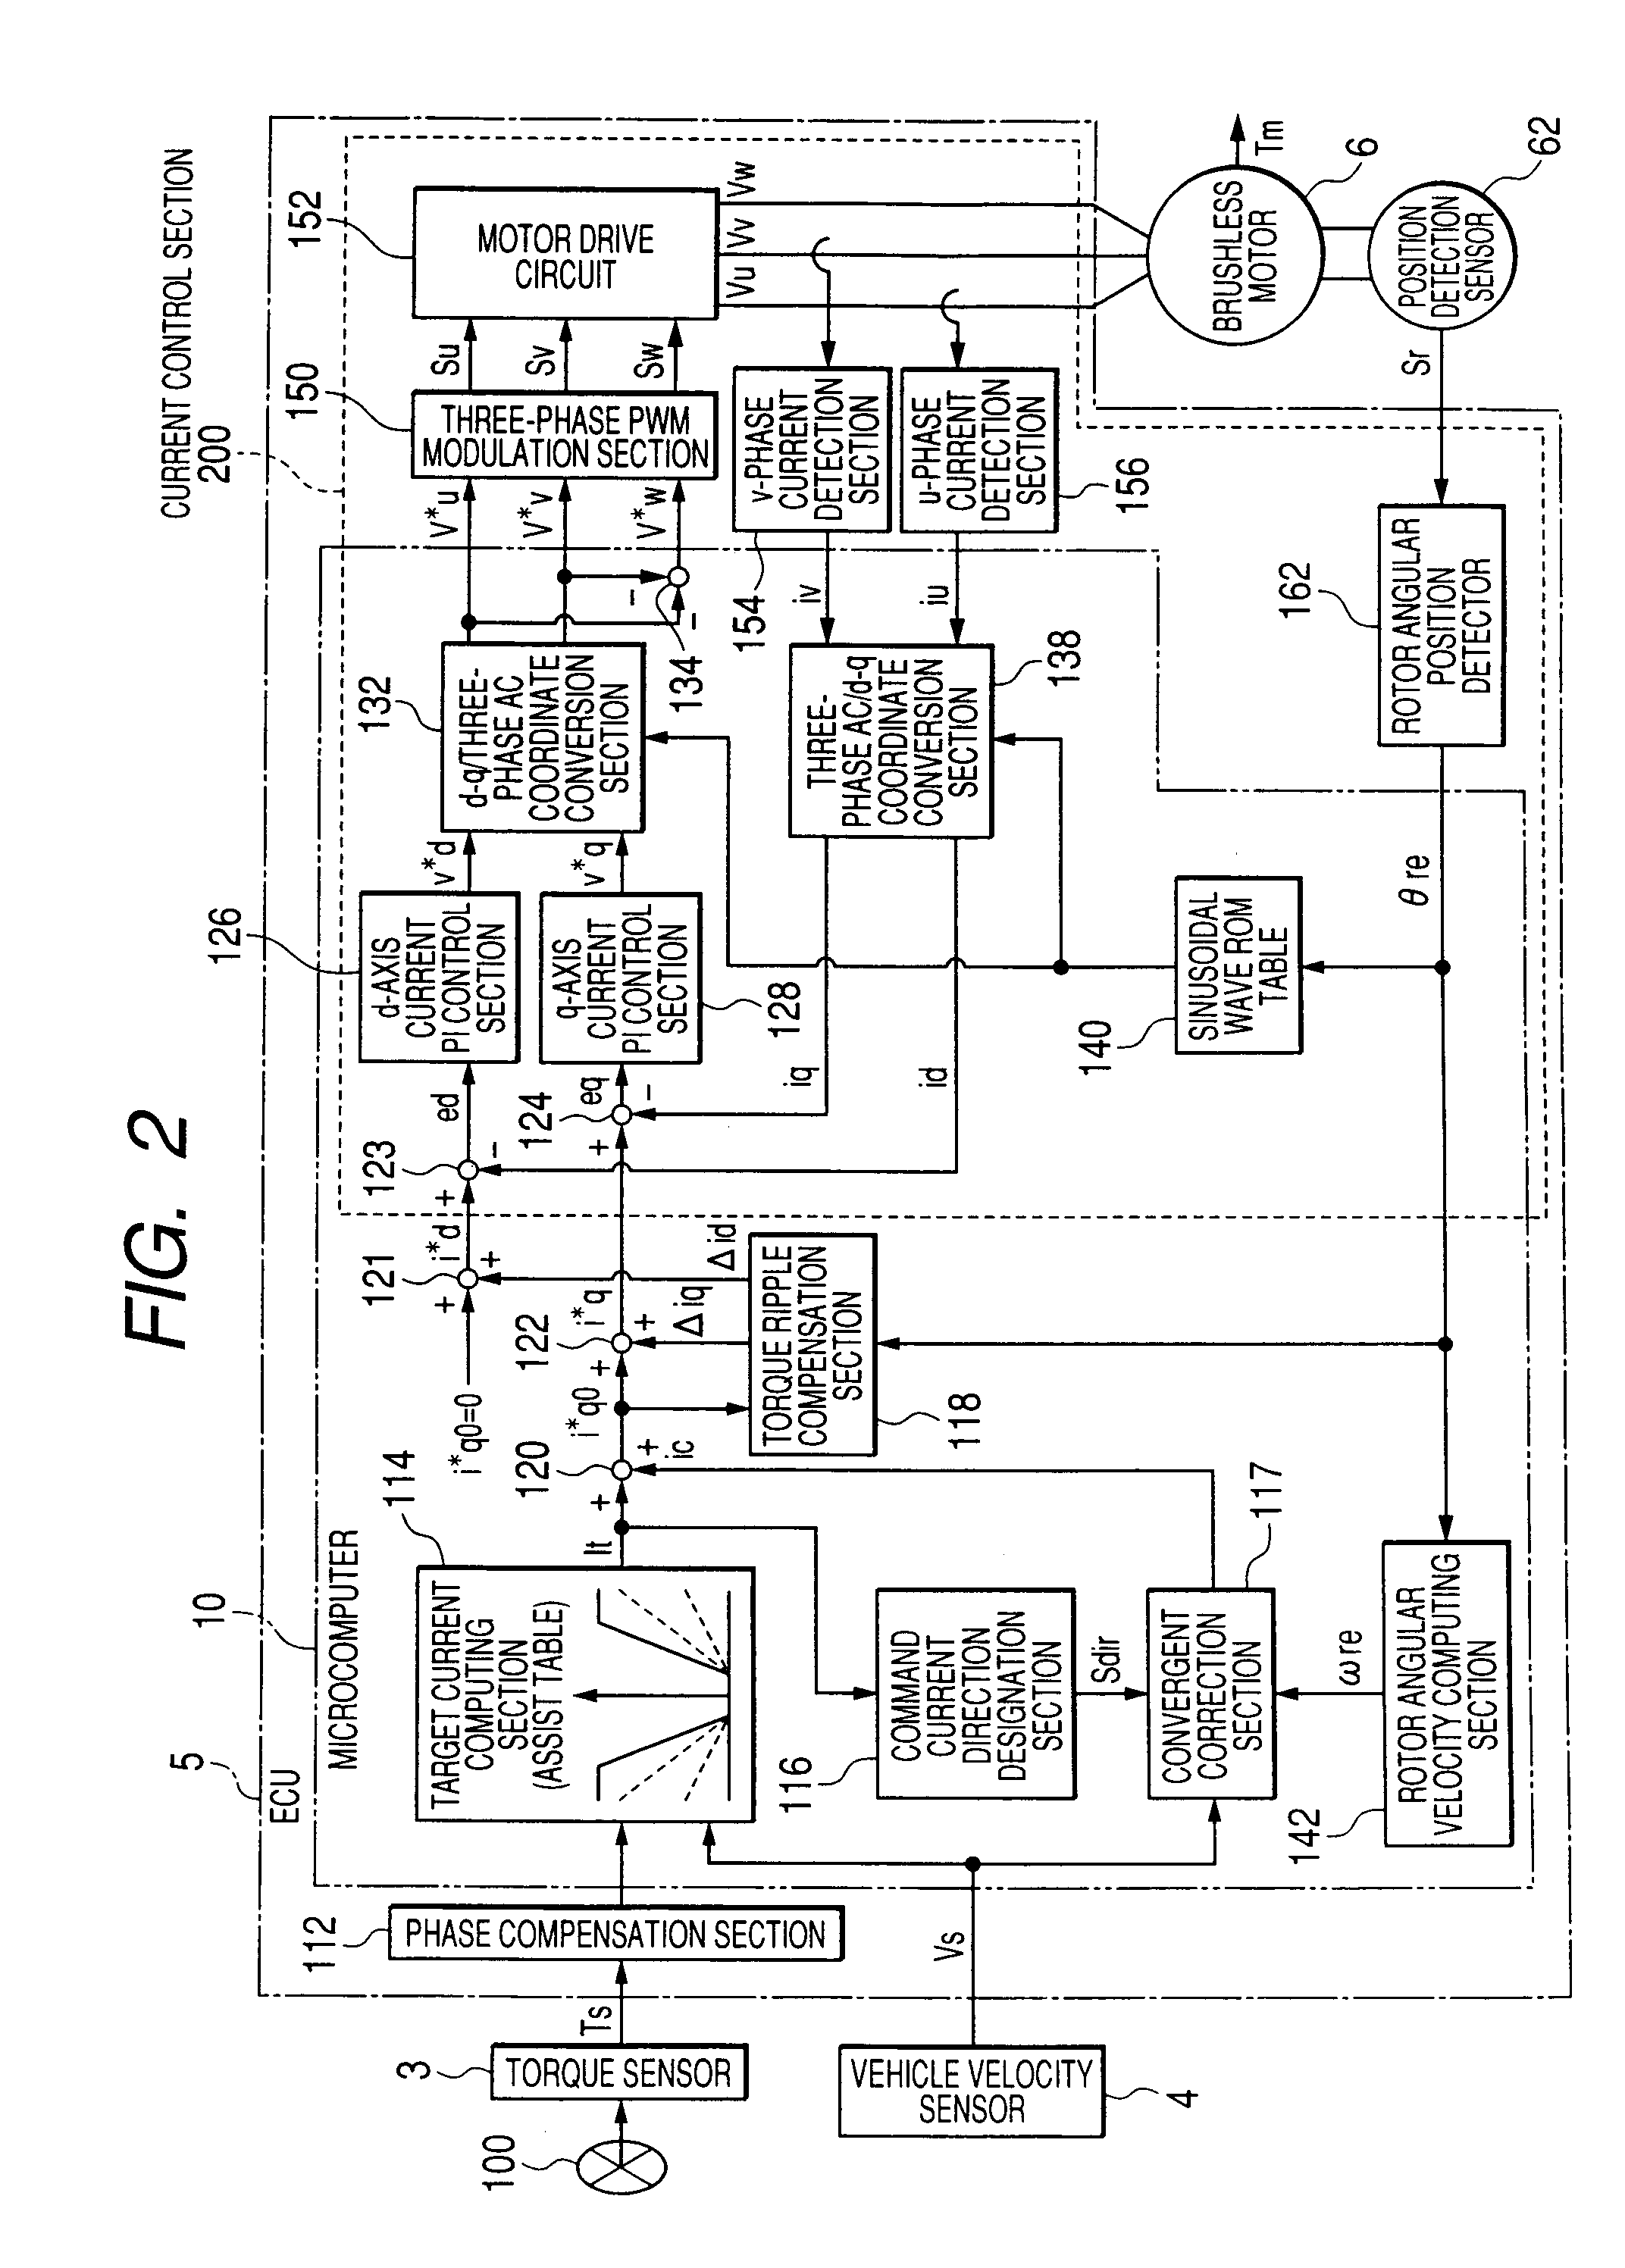 Motor controller and electric power steering system